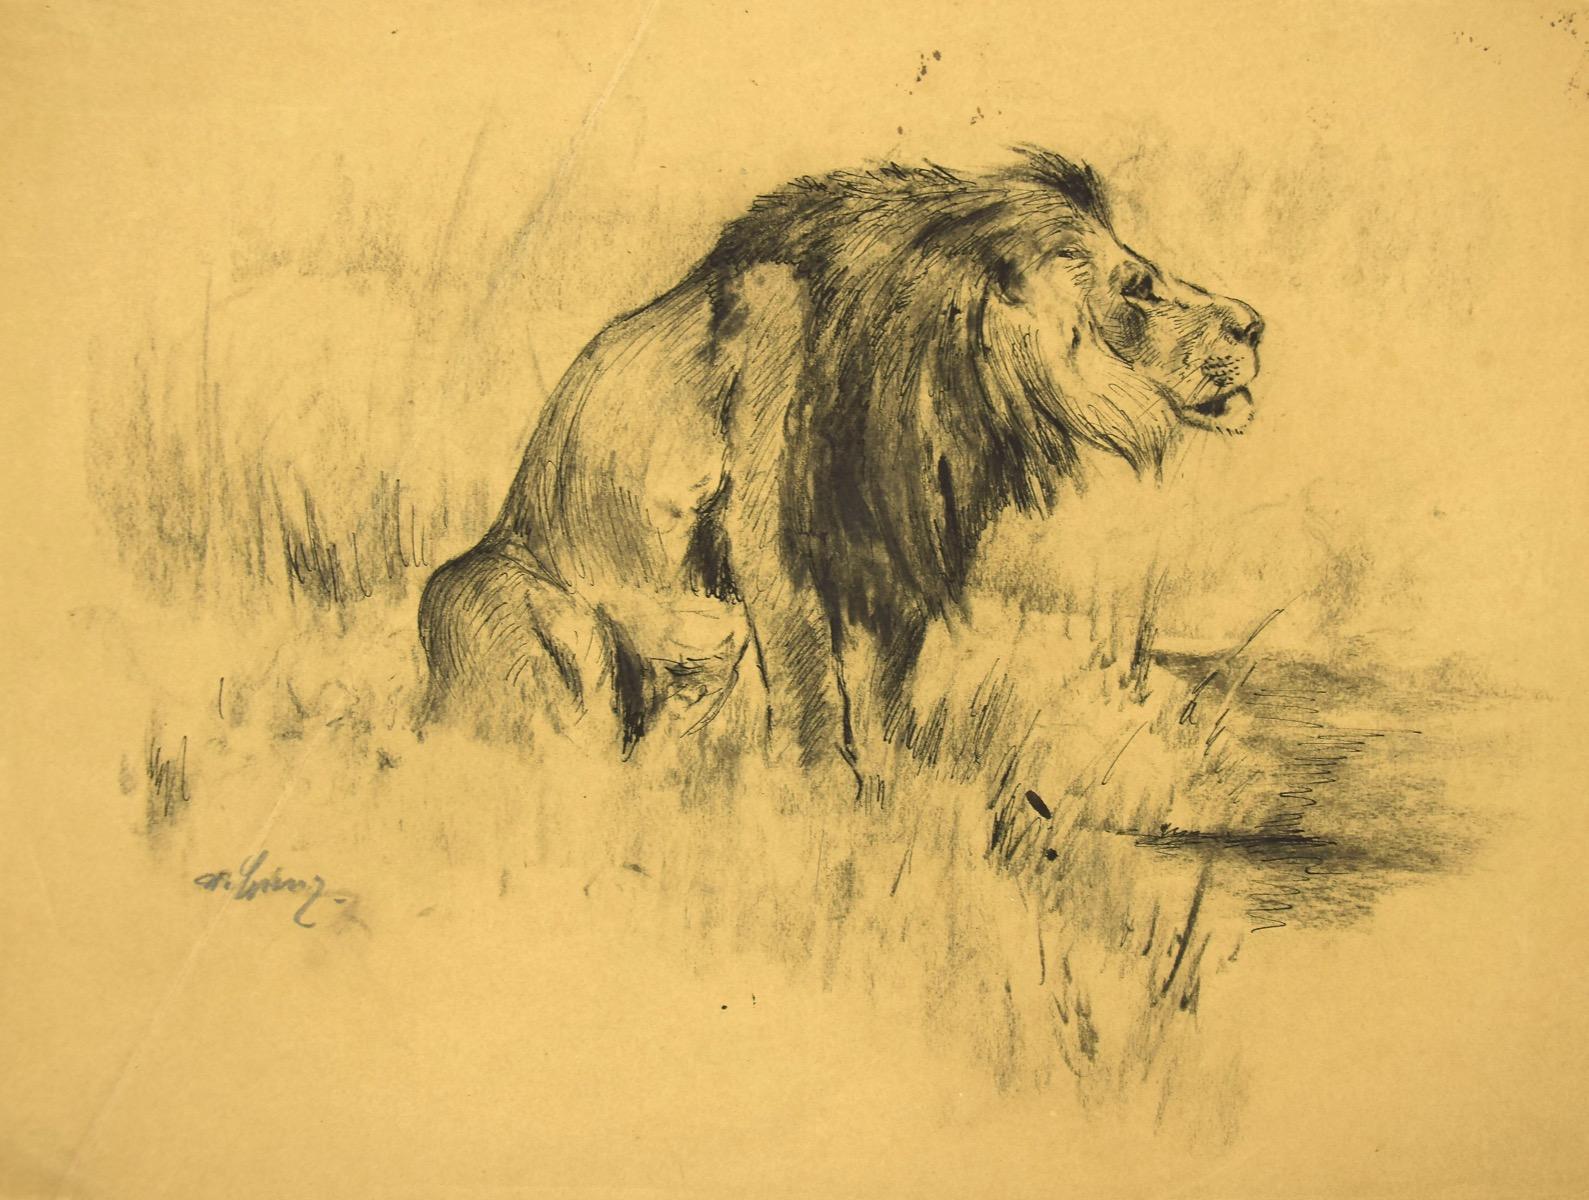 Lion is a beautiful charcoal original drawing on pink-colored paper, realized in 1943 by the German artist Wilhelm Lorenz, also called Willi Lorenz. Signed in pencil on the lower right margin on the recto and on the higher right margin on the